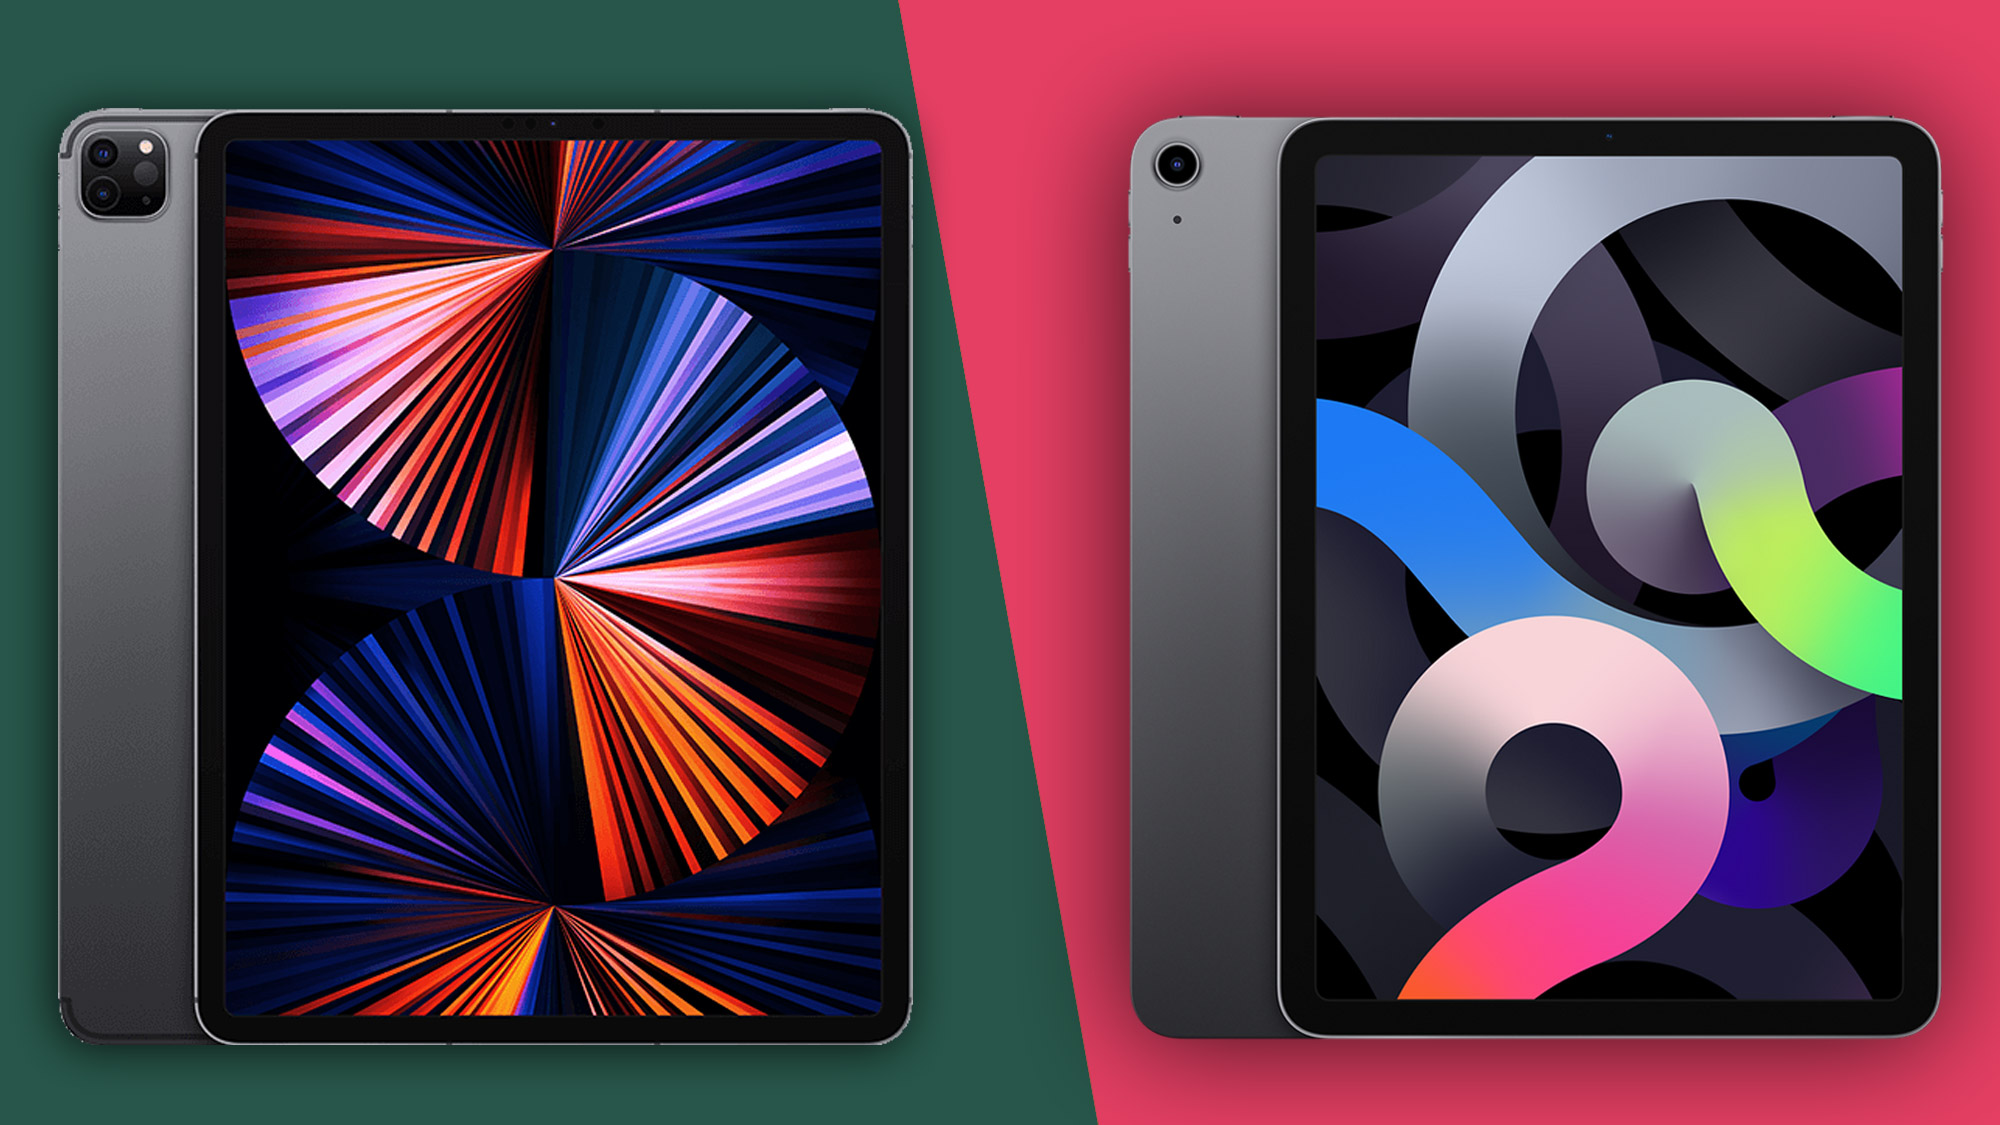 iPad Pro 12.9 (2021) vs iPad Air 4: which tablet is made for you